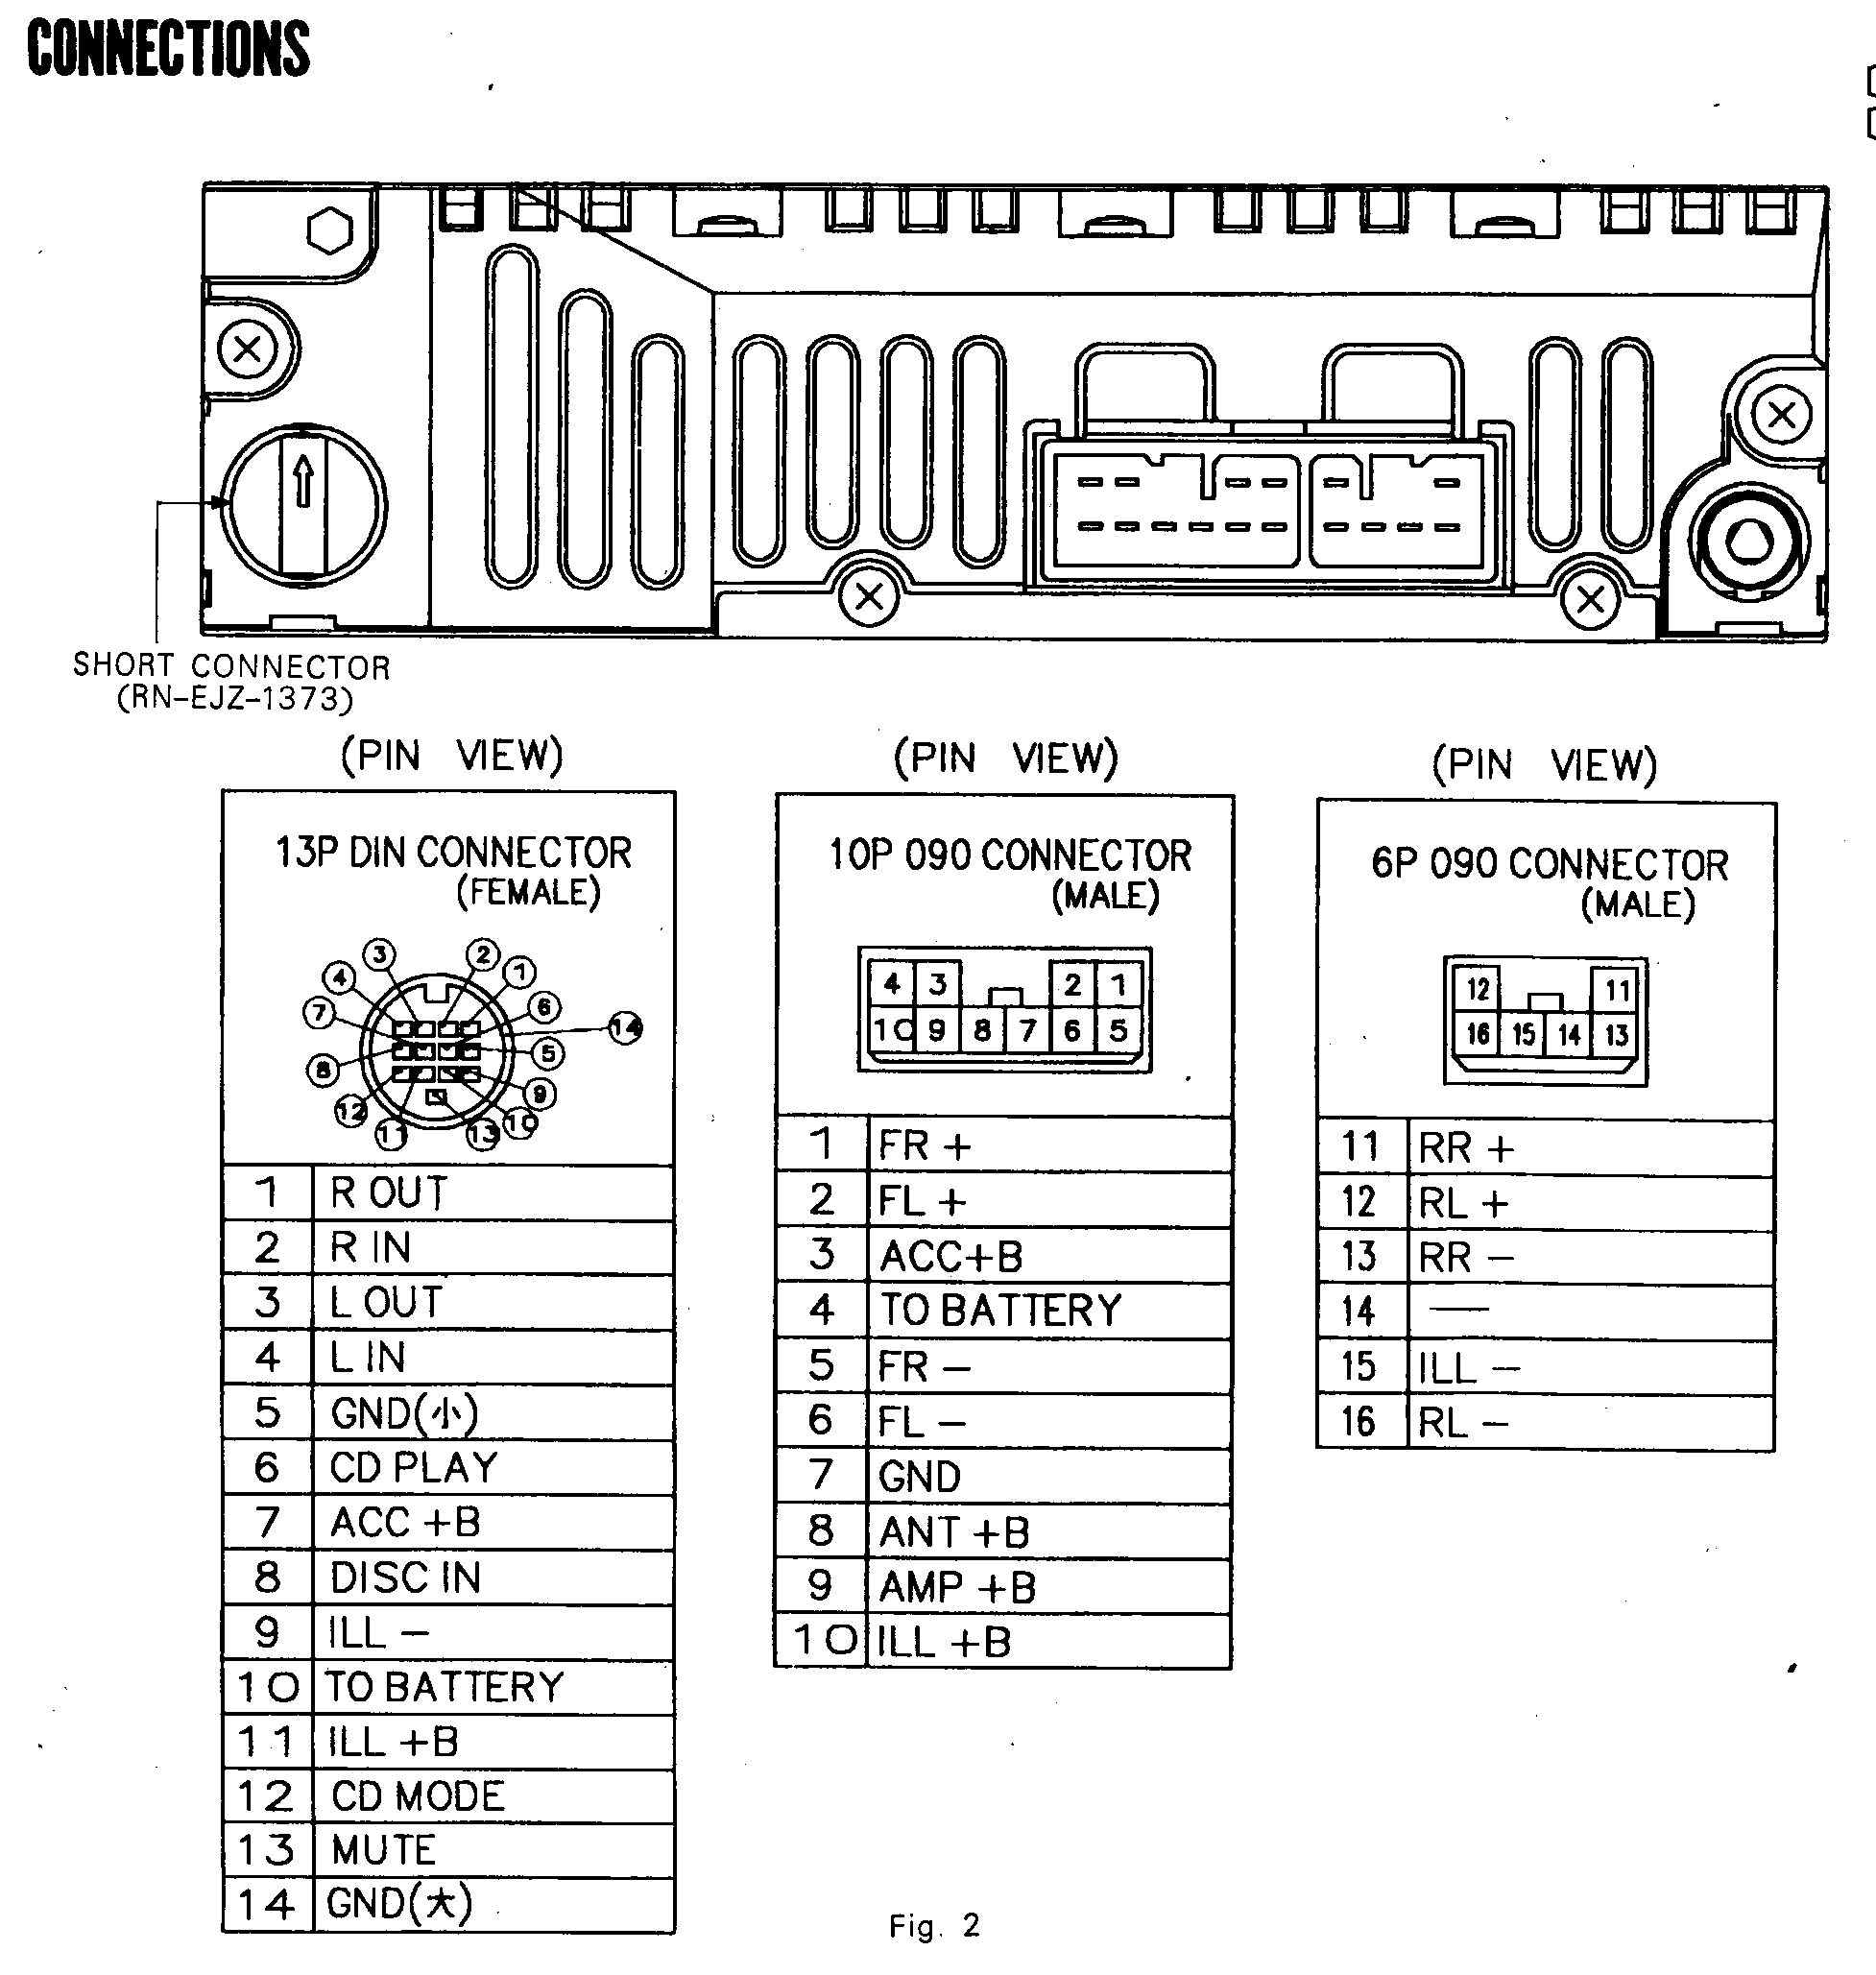 Wiring Diagram For Car Stereo With Amplifier from carstereohelp.net